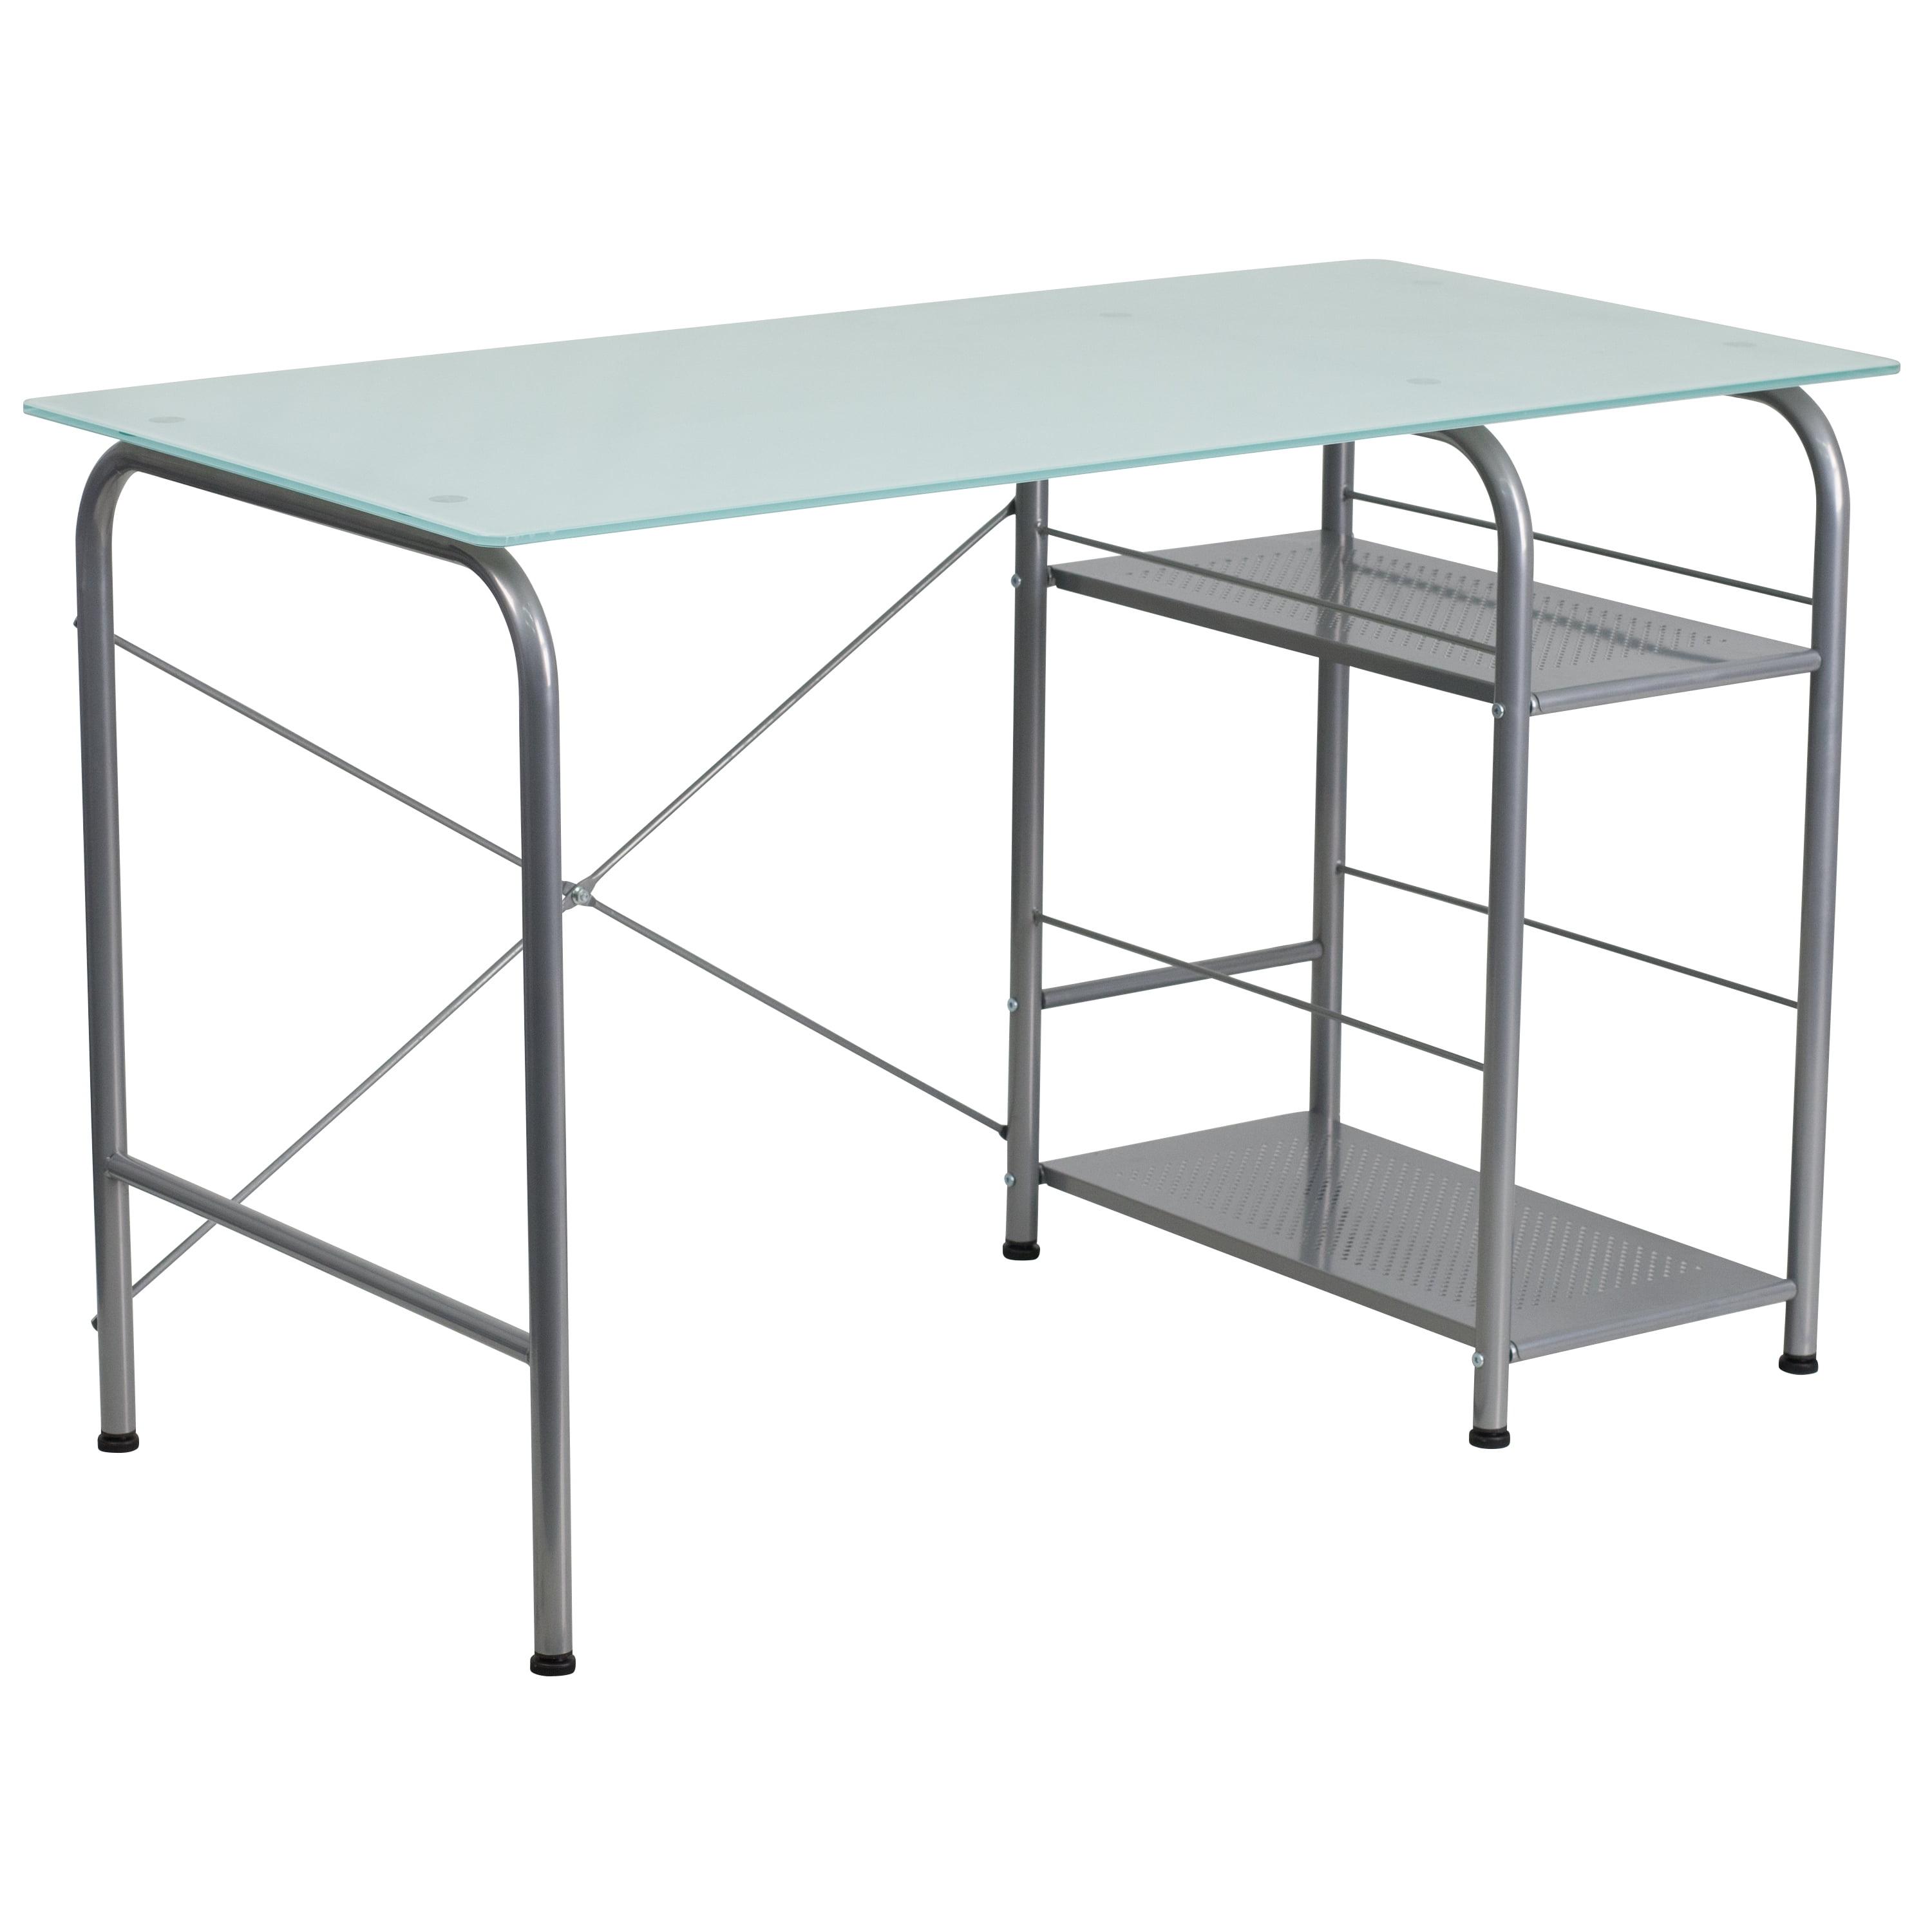 Silk White and Silver Tempered Glass Computer Desk with Open Storage